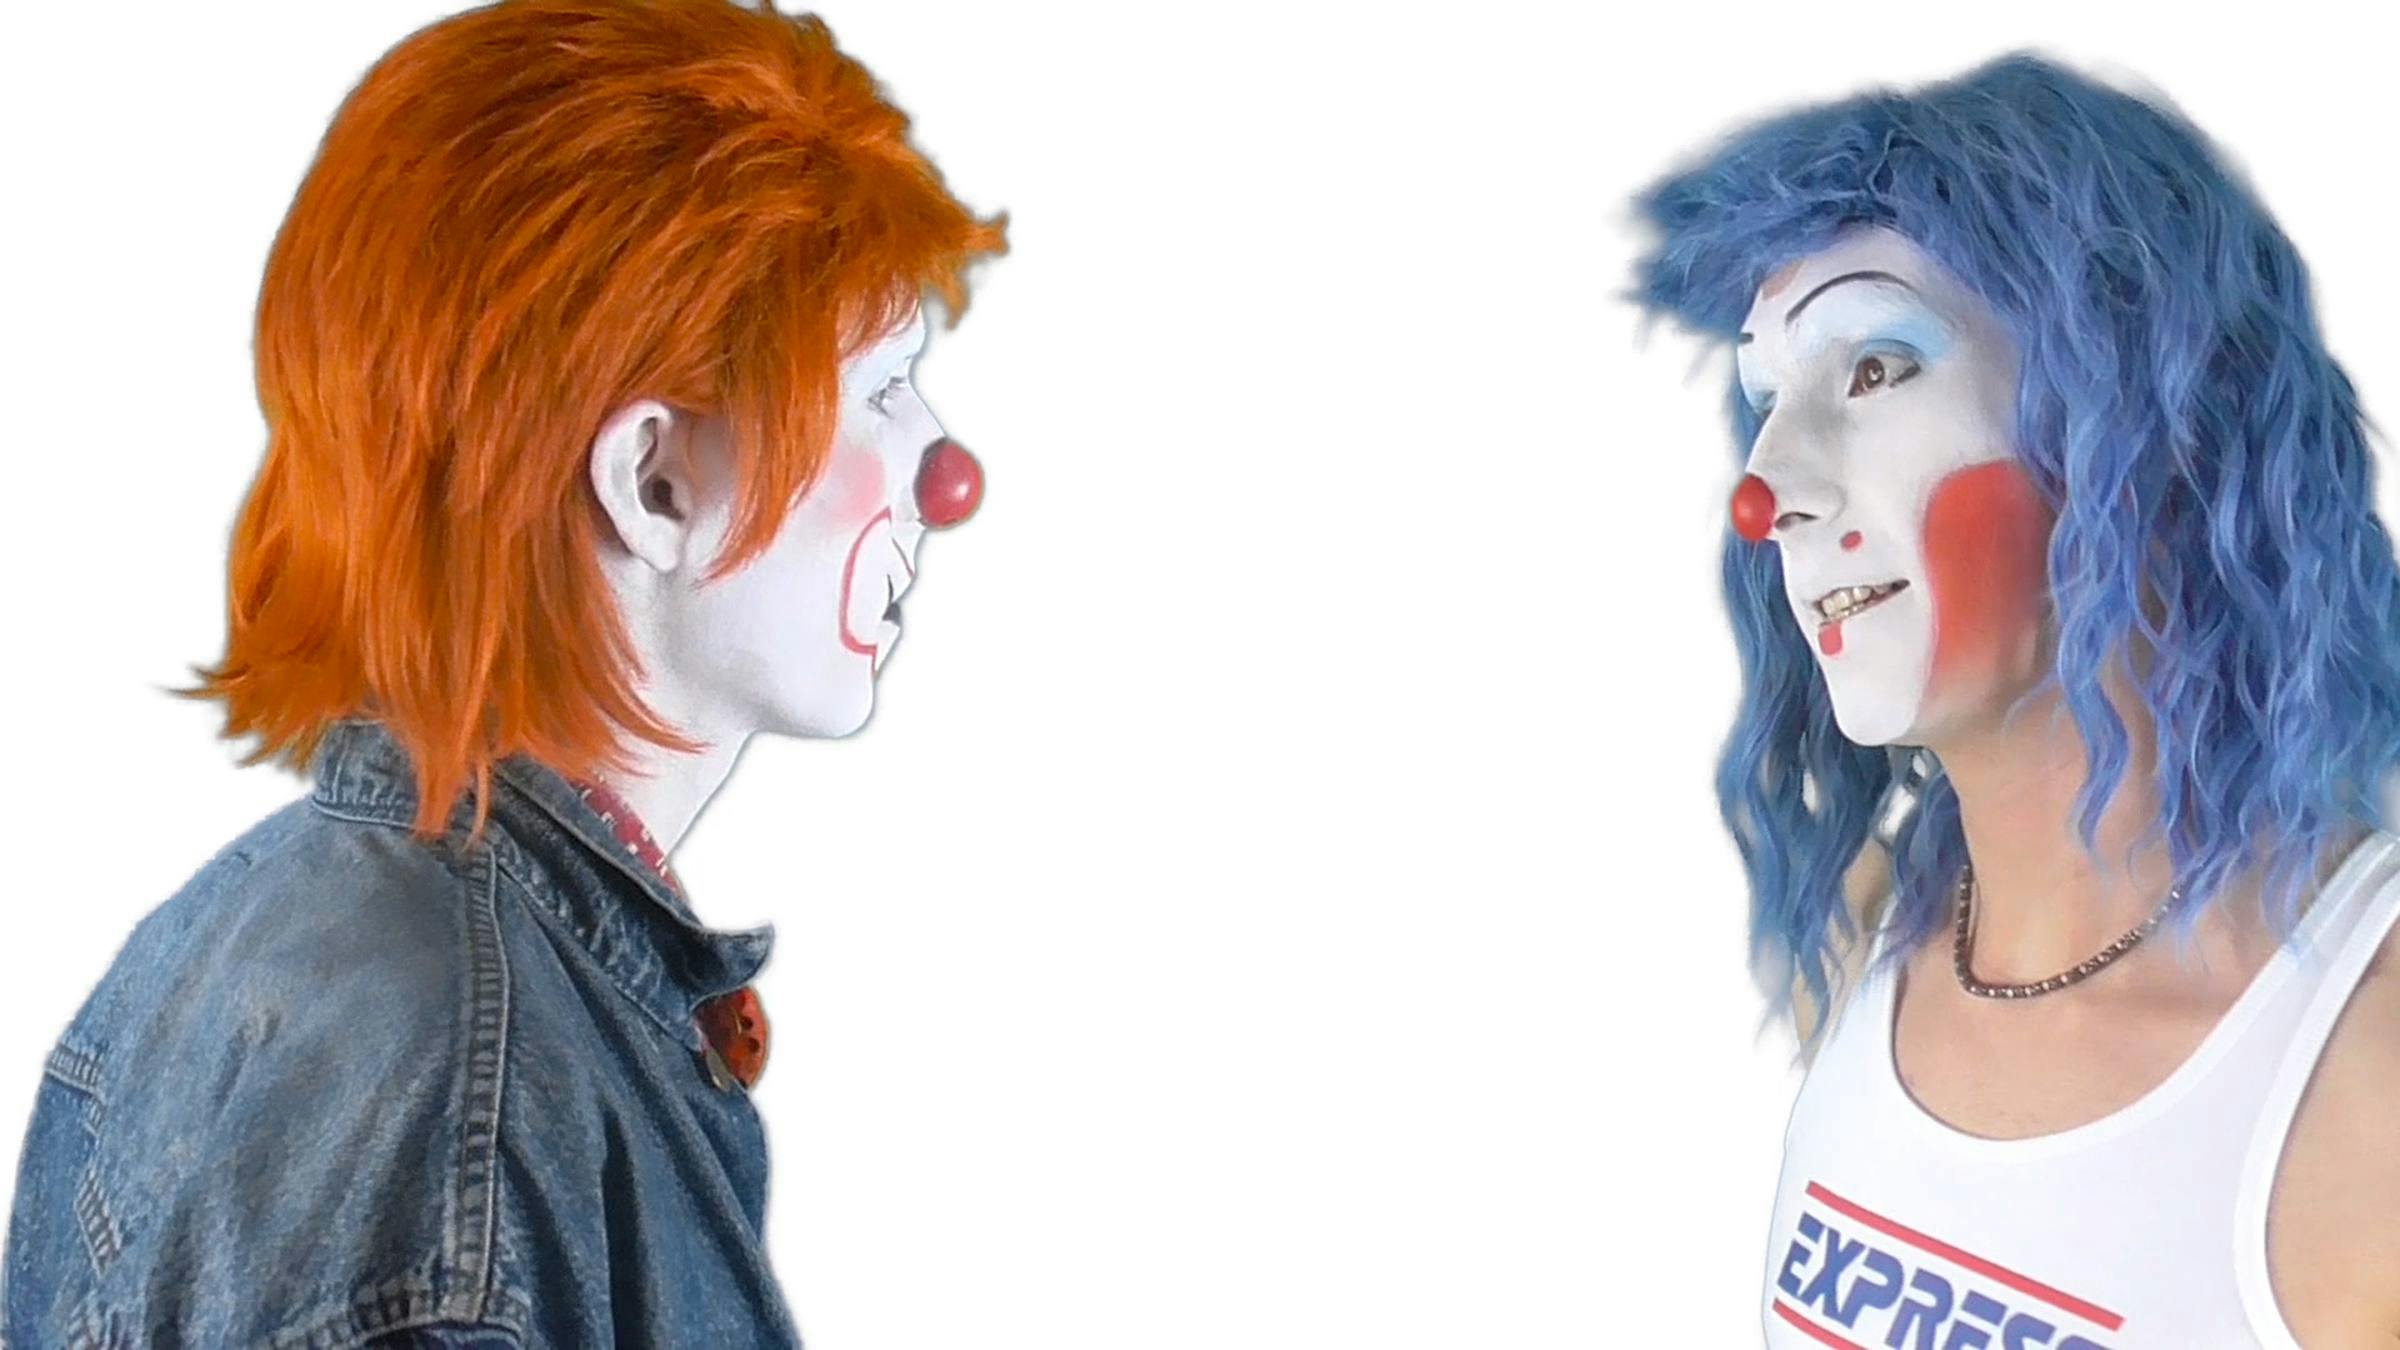 Two people wearing clown-like make up face each other as if they're having a conversation. One has orange hair and the other has blue hair.